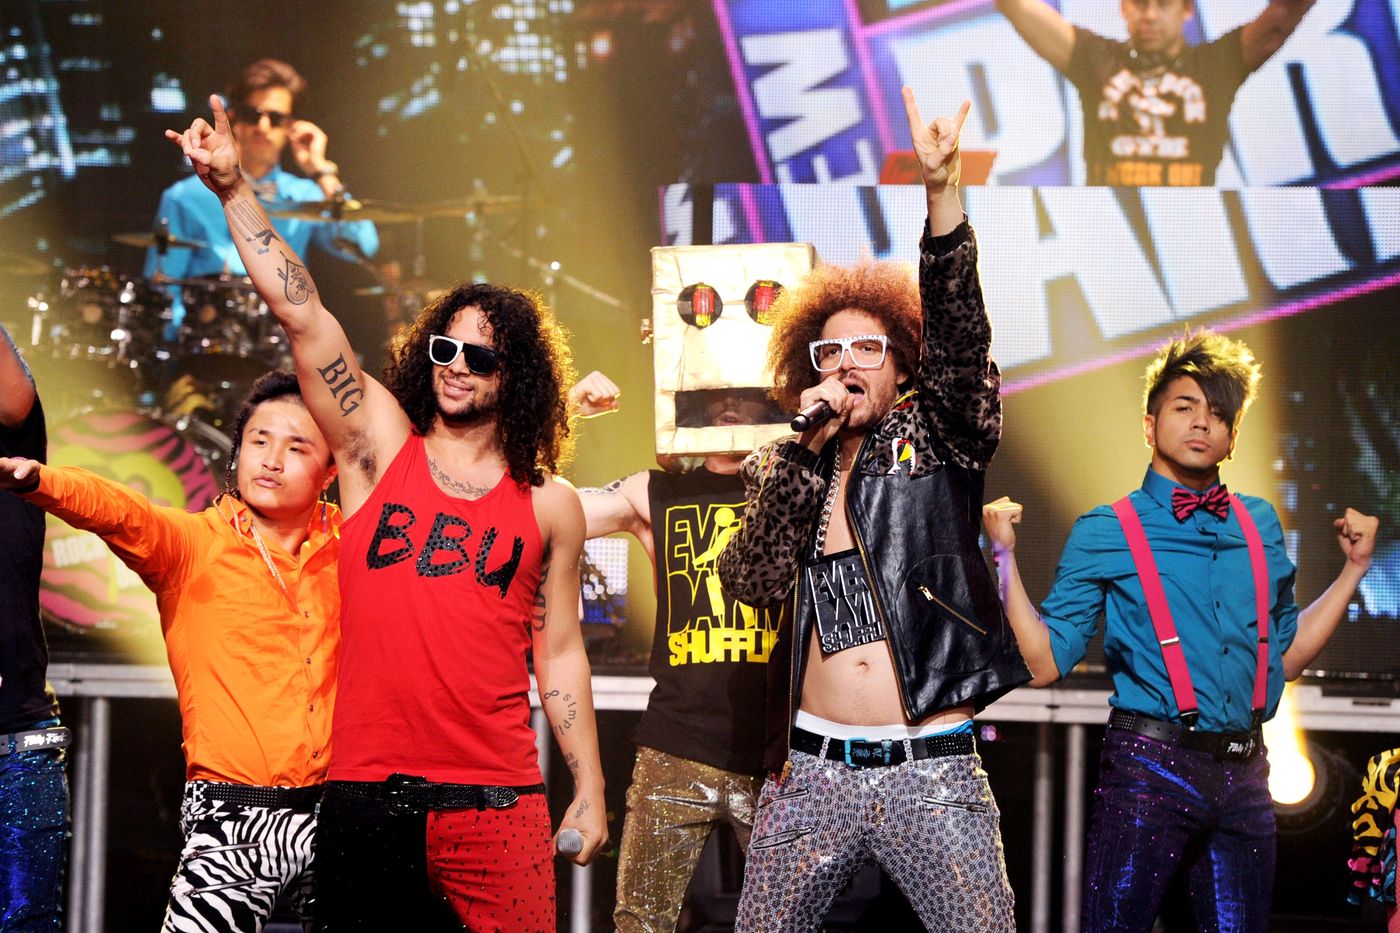 Get Crazy, Get Loud – How an MTV Show in the 2010s Left a Lasting